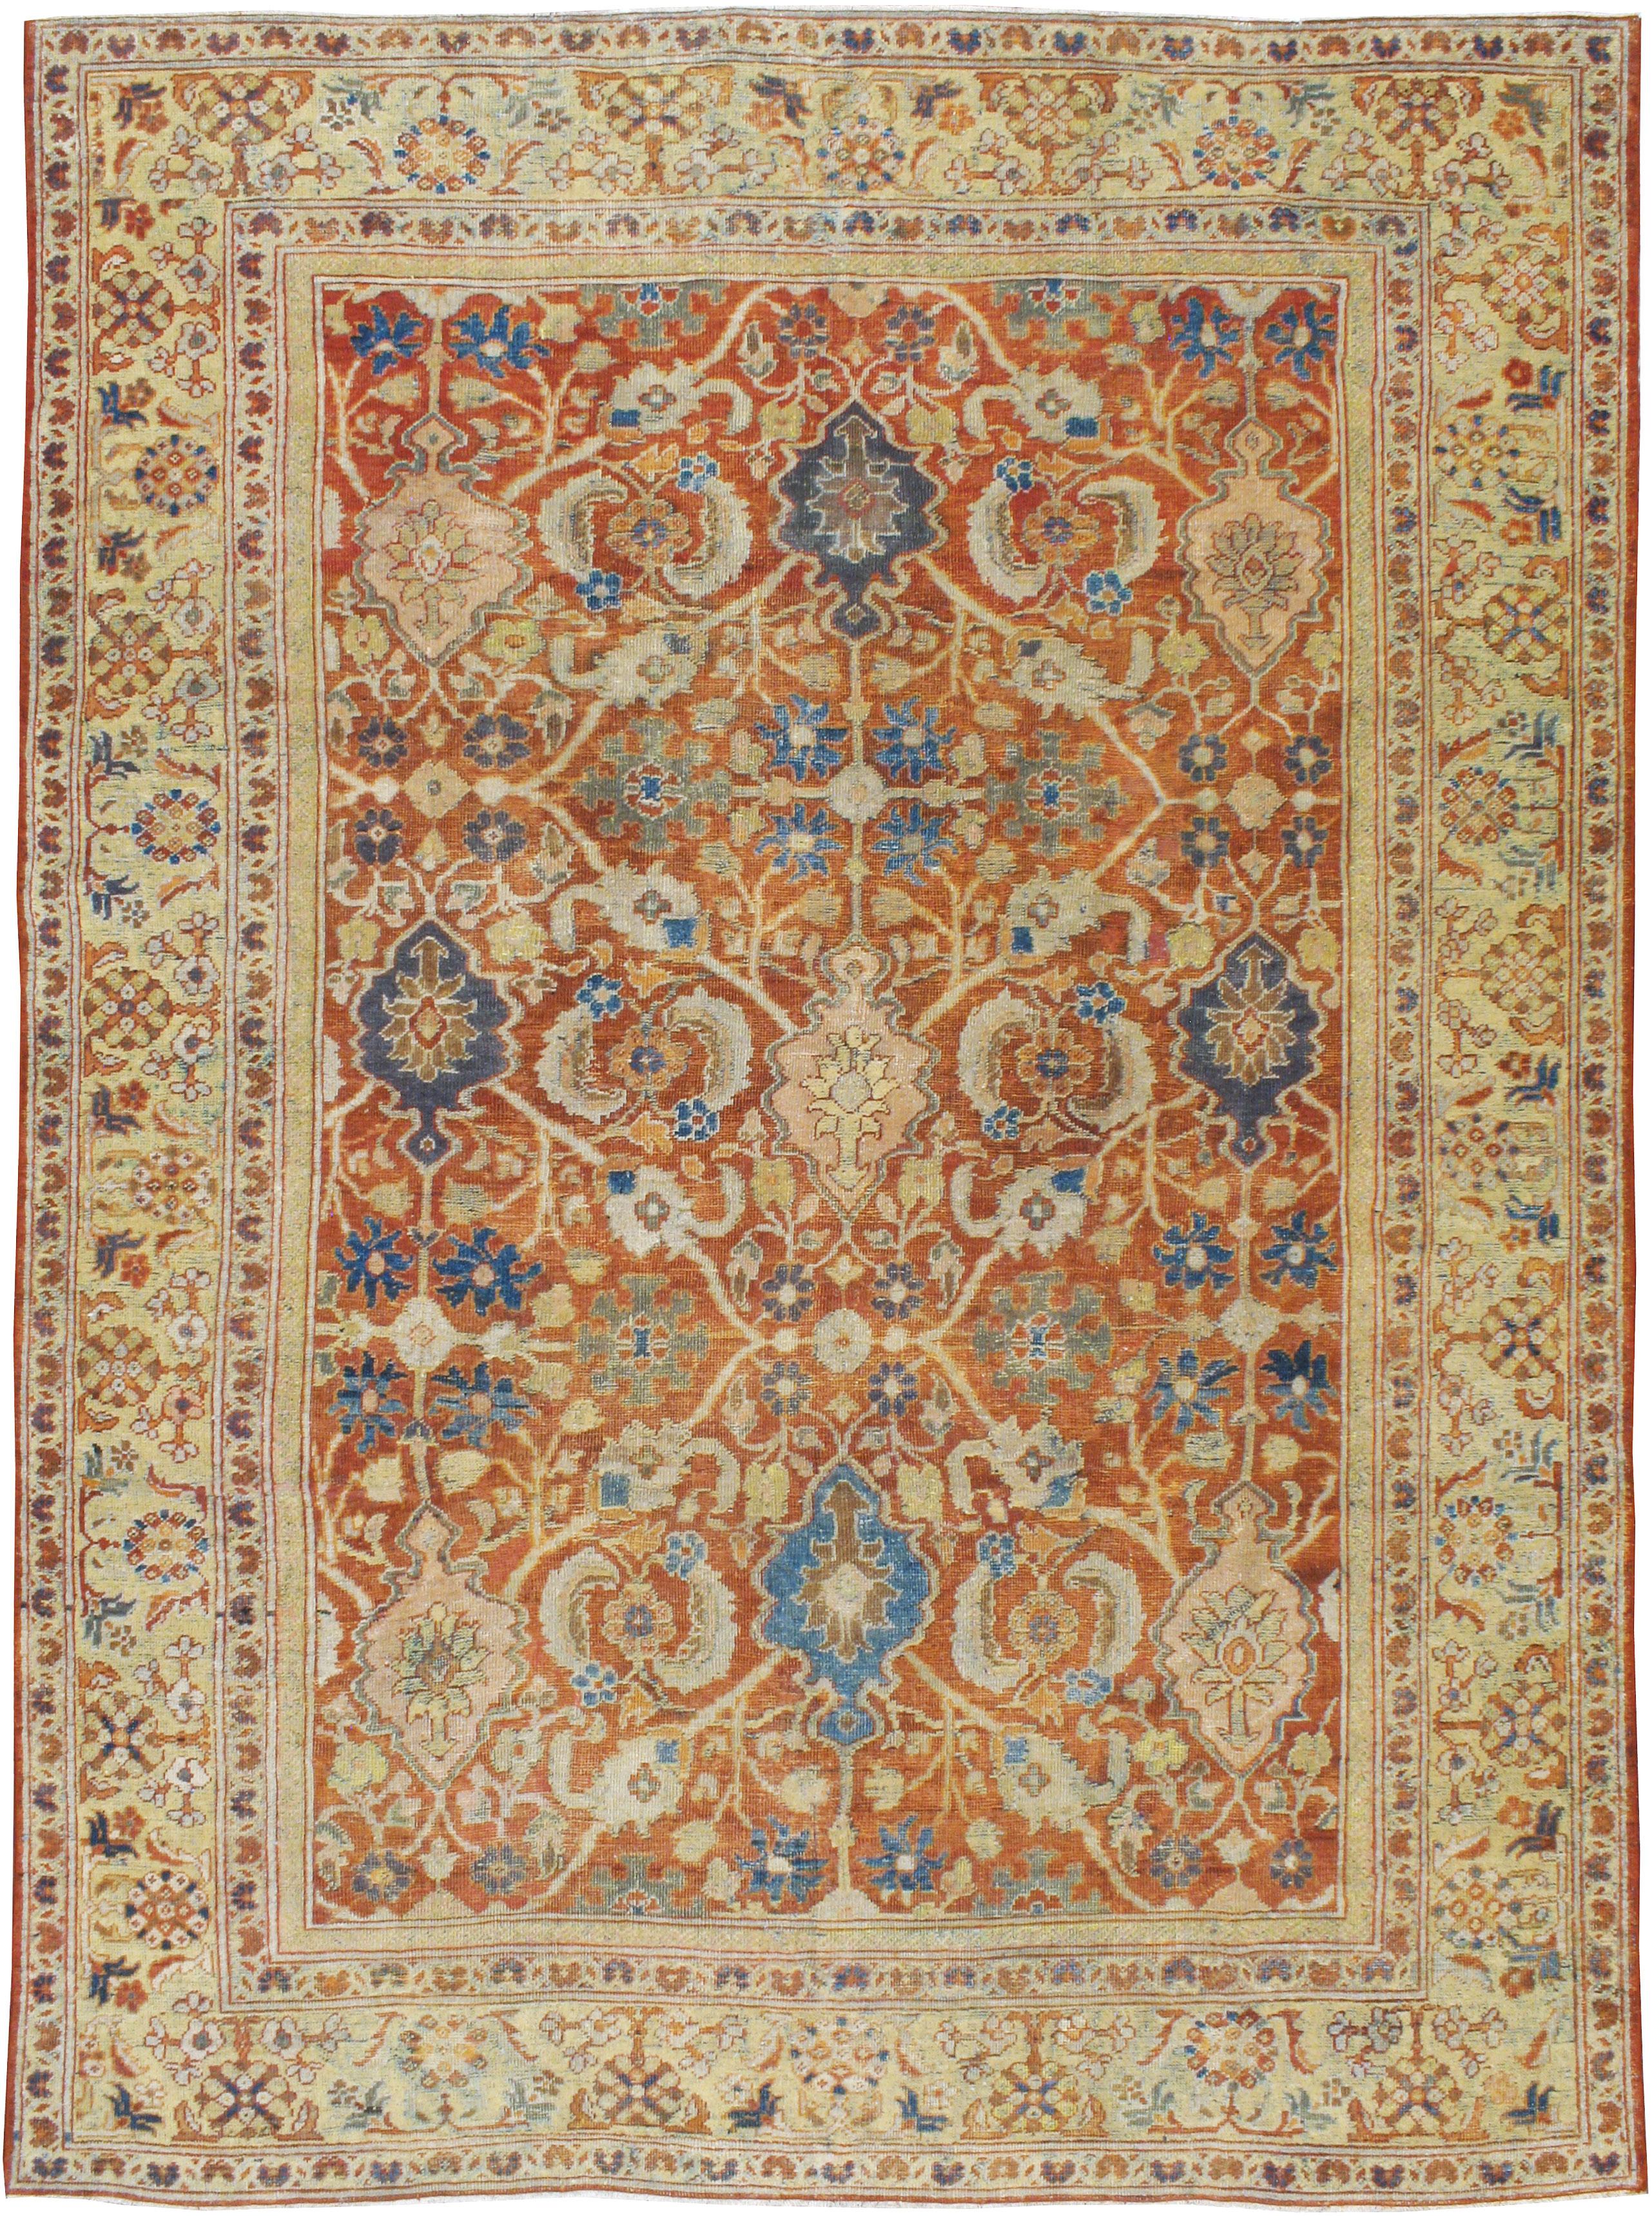 An antique Persian Mahal carpet from the early 20th century.